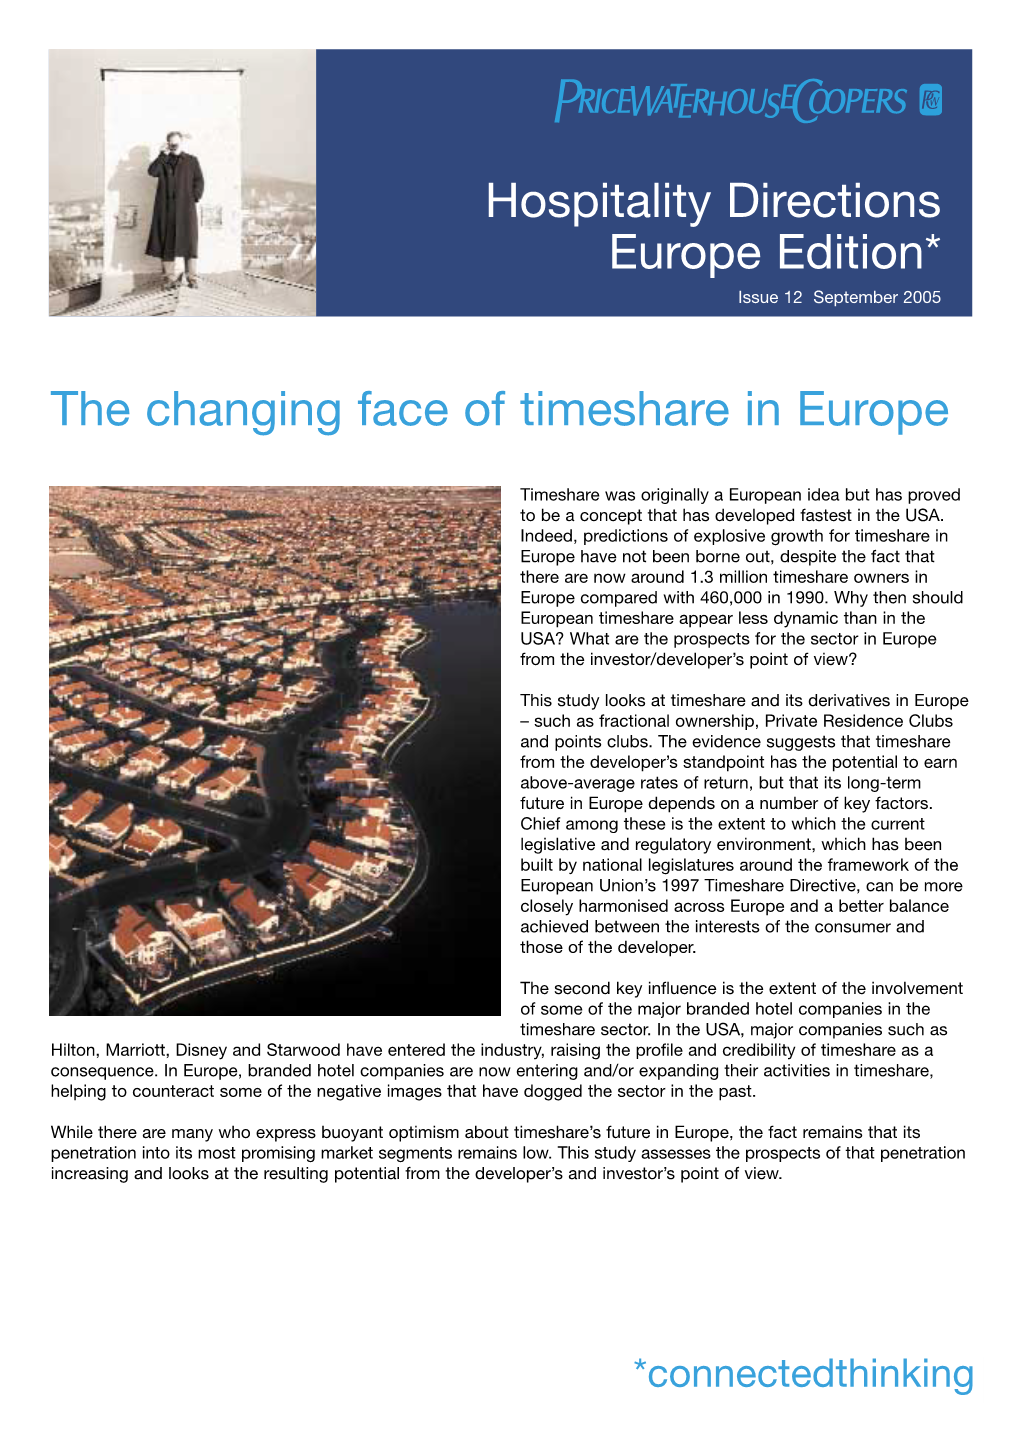 The Changing Face of Timeshare in Europe